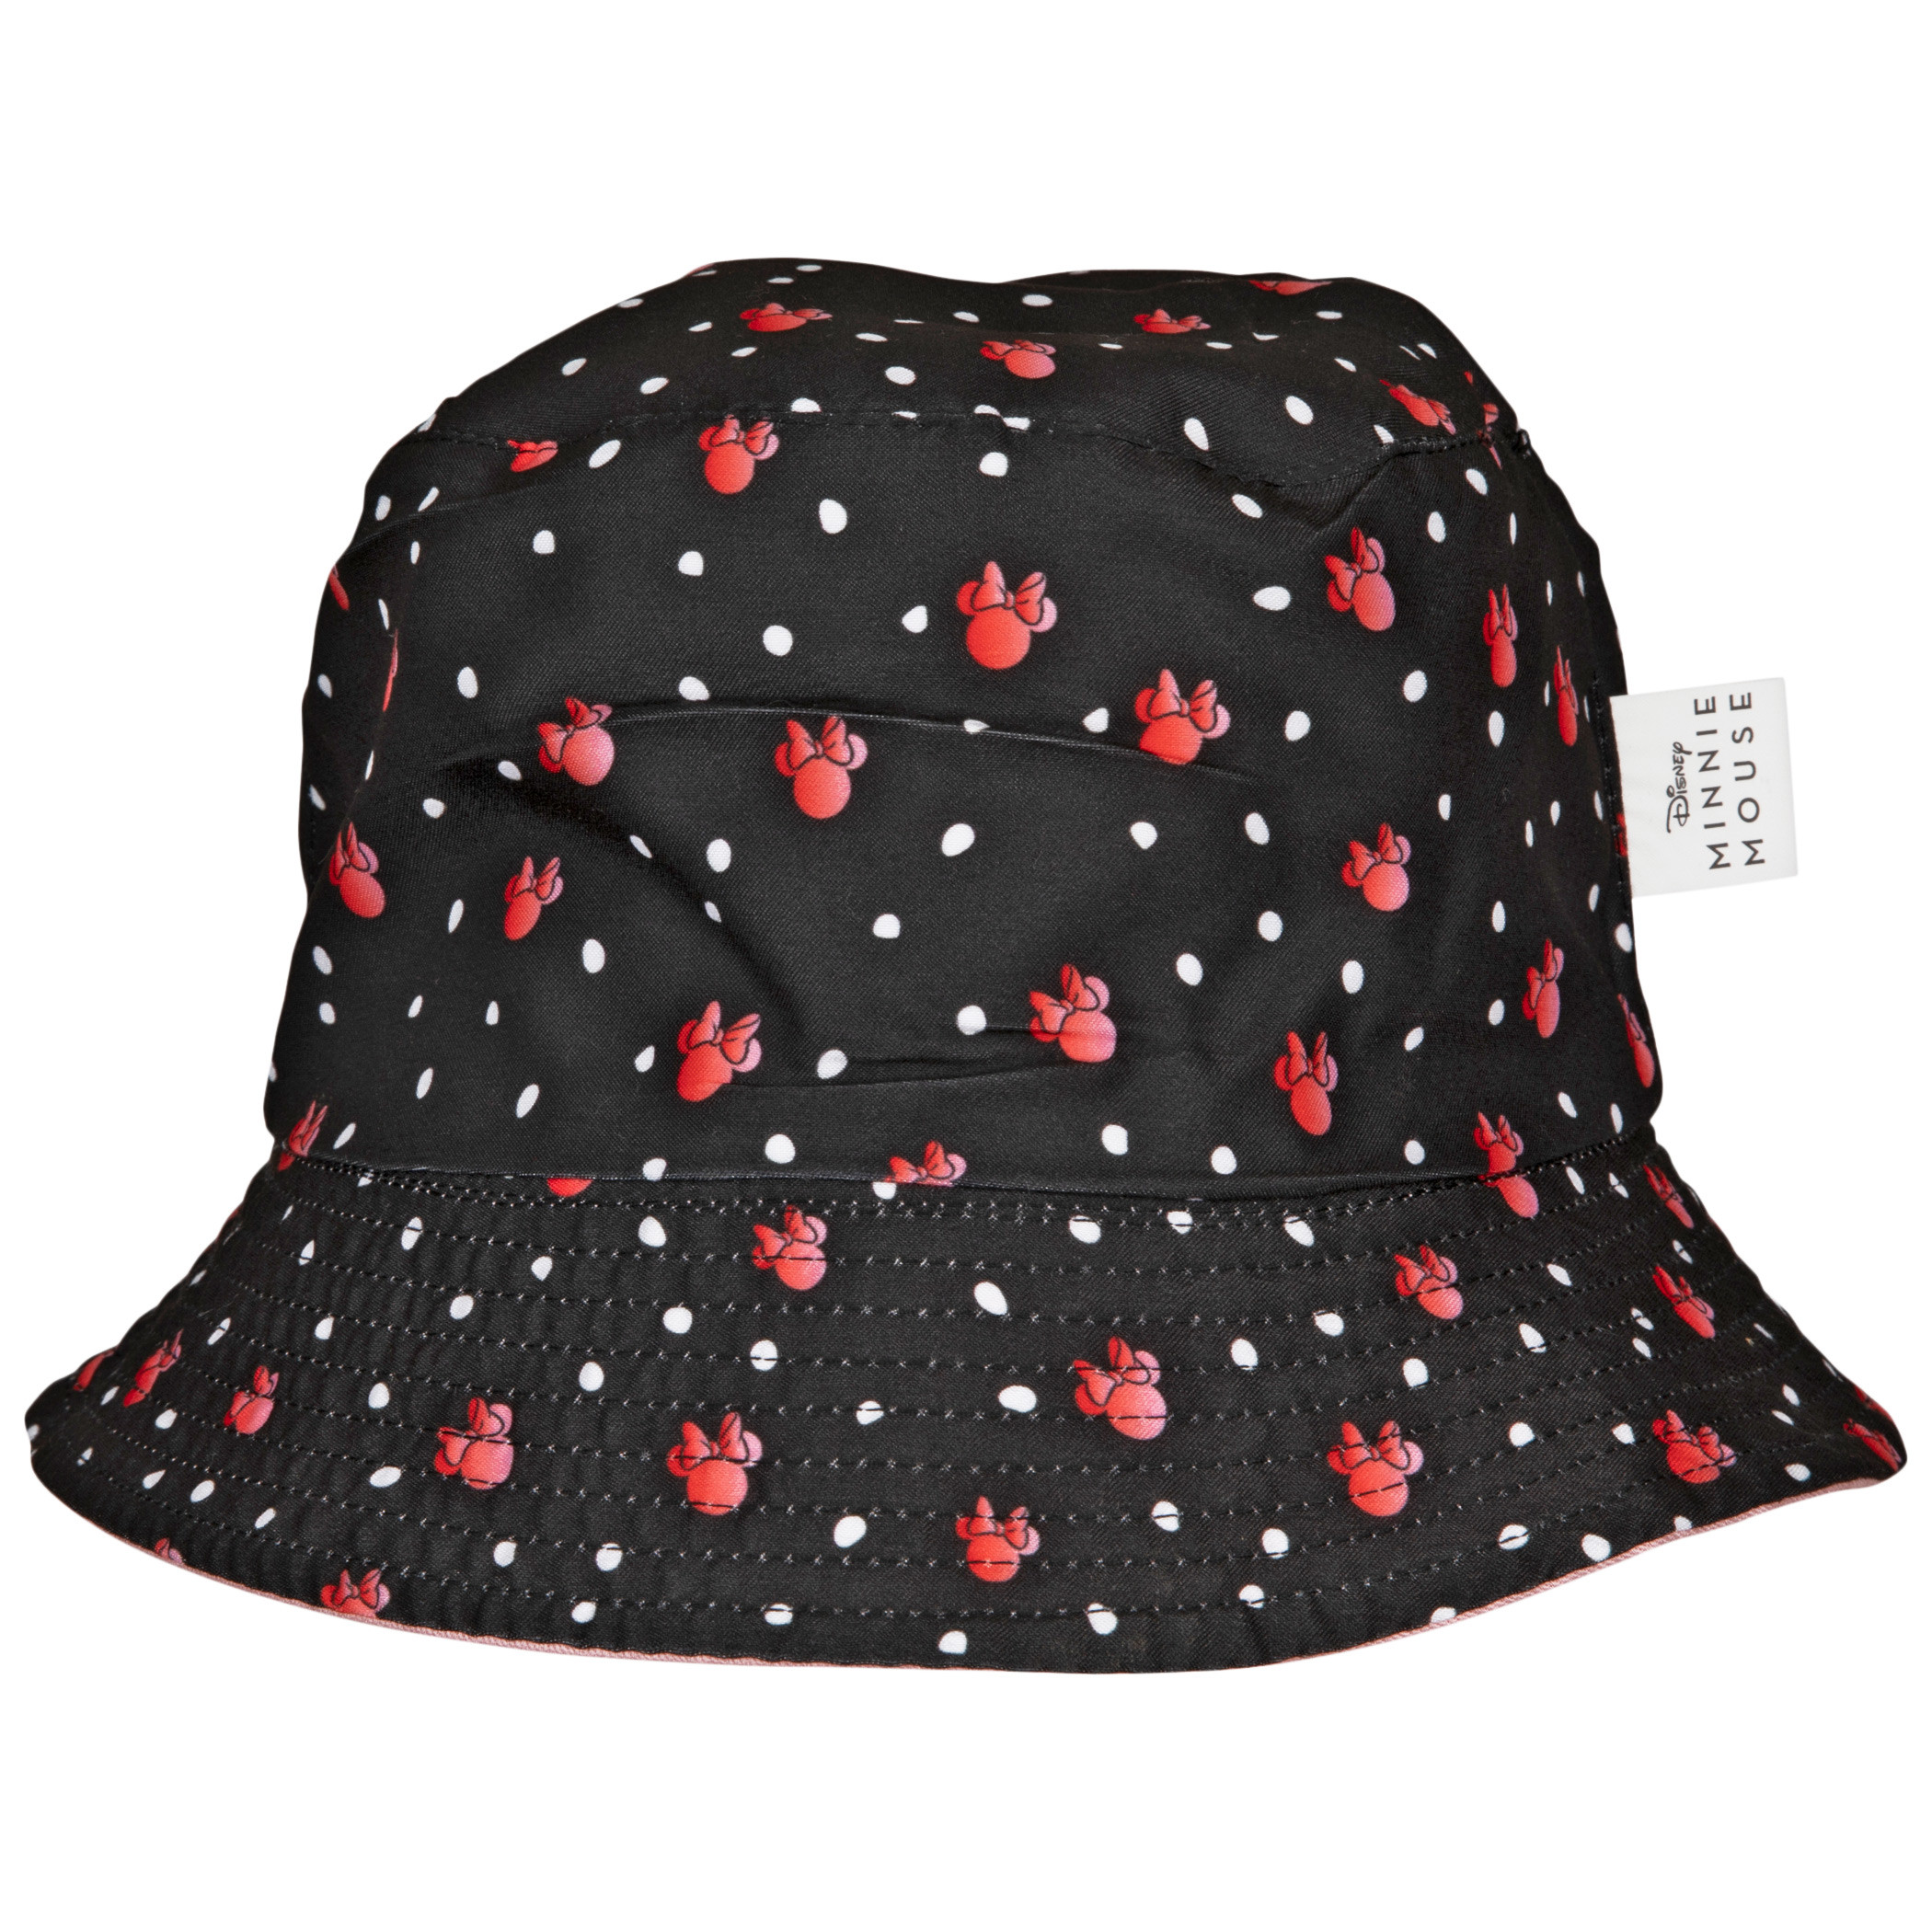 Disney Minnie Mouse Character and All Over Symbols Reversible Bucket Hat